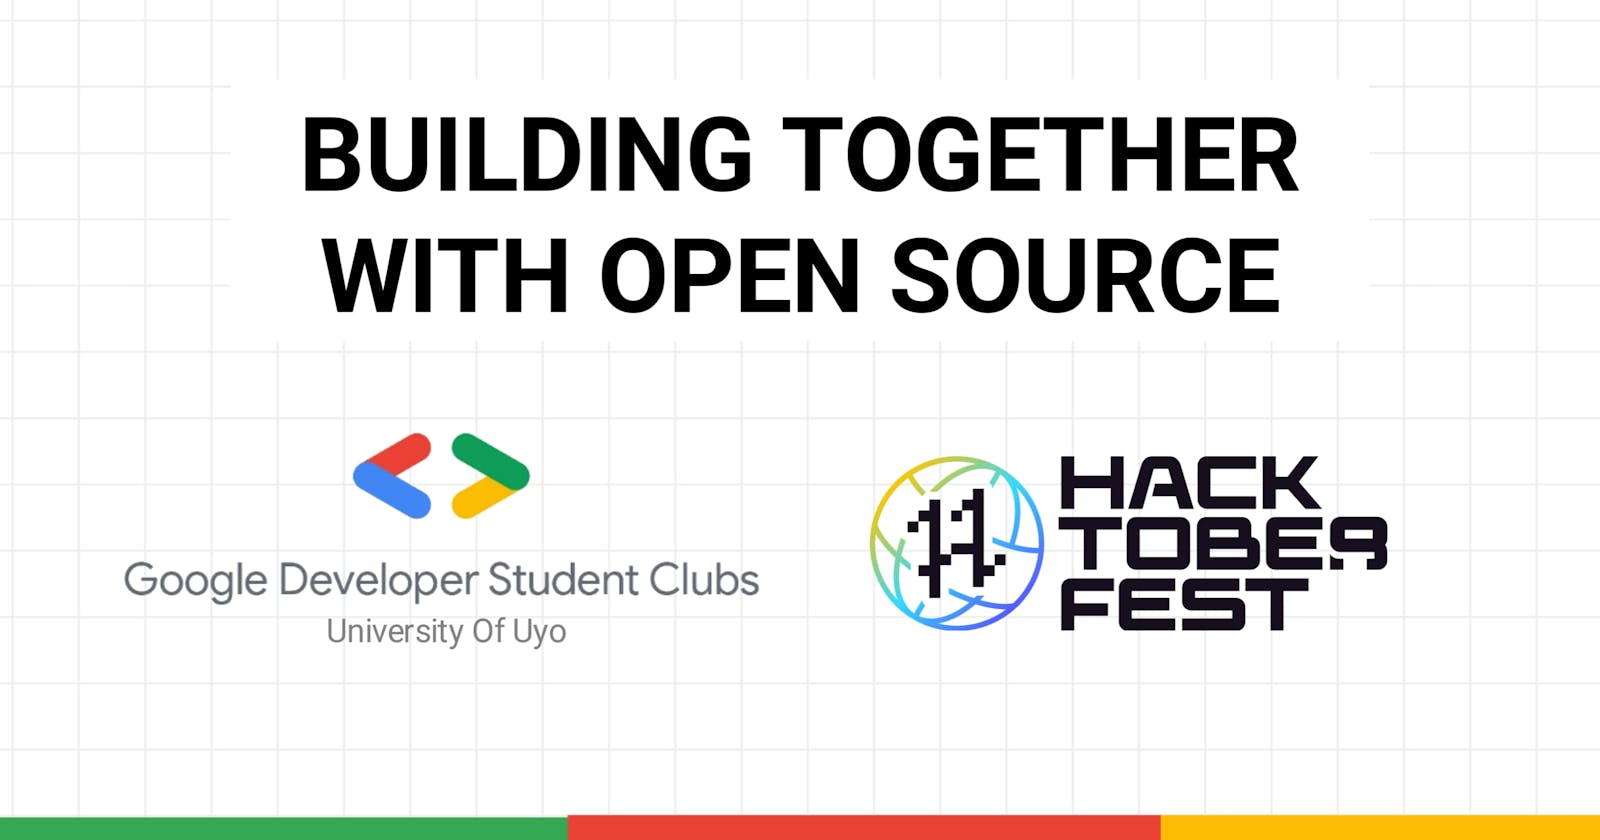 Building Together With Open Source (Hacktoberfest)